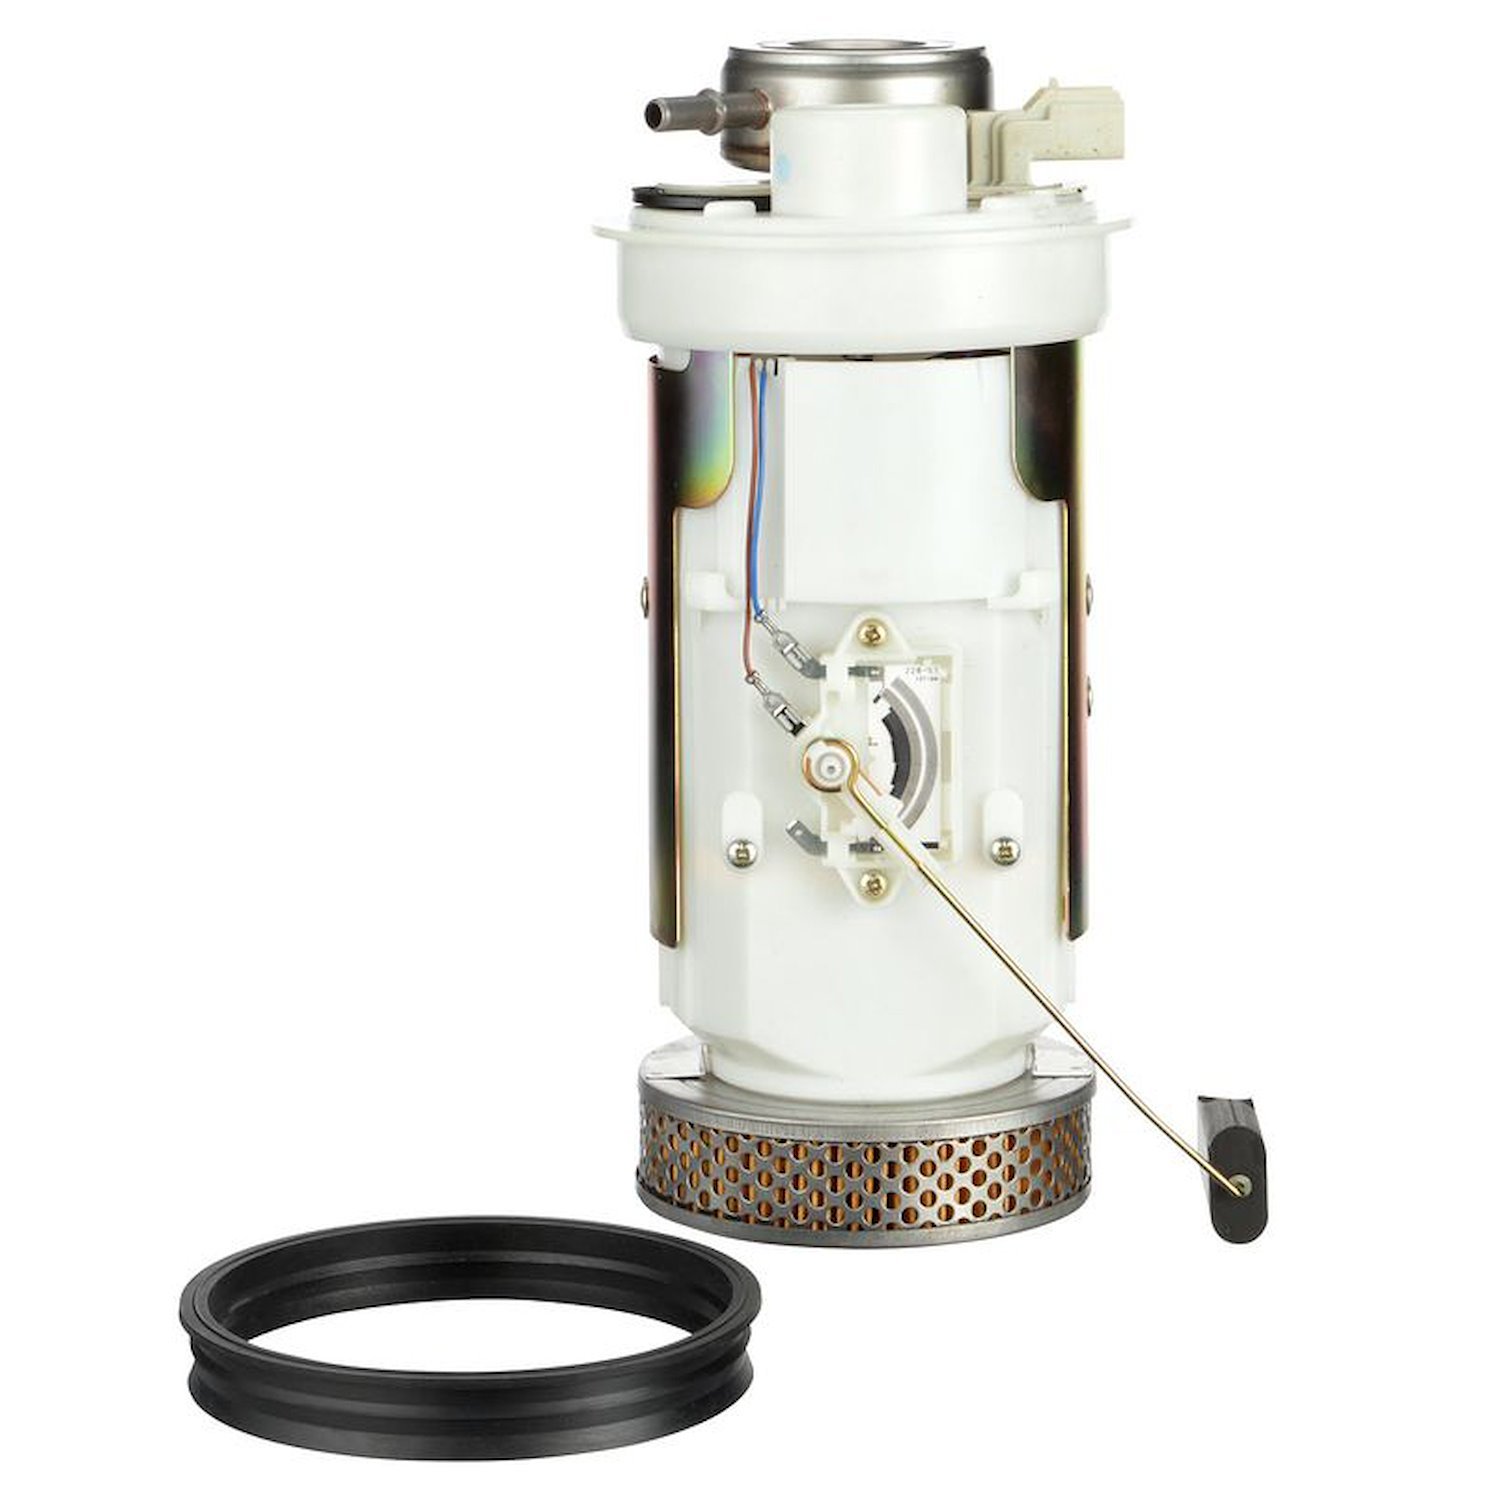 OE Chrysler/Dodge Replacement Electric Fuel Pump Module Assembly 1996 Dodge Ramcharger 5.2L/5.9L V8